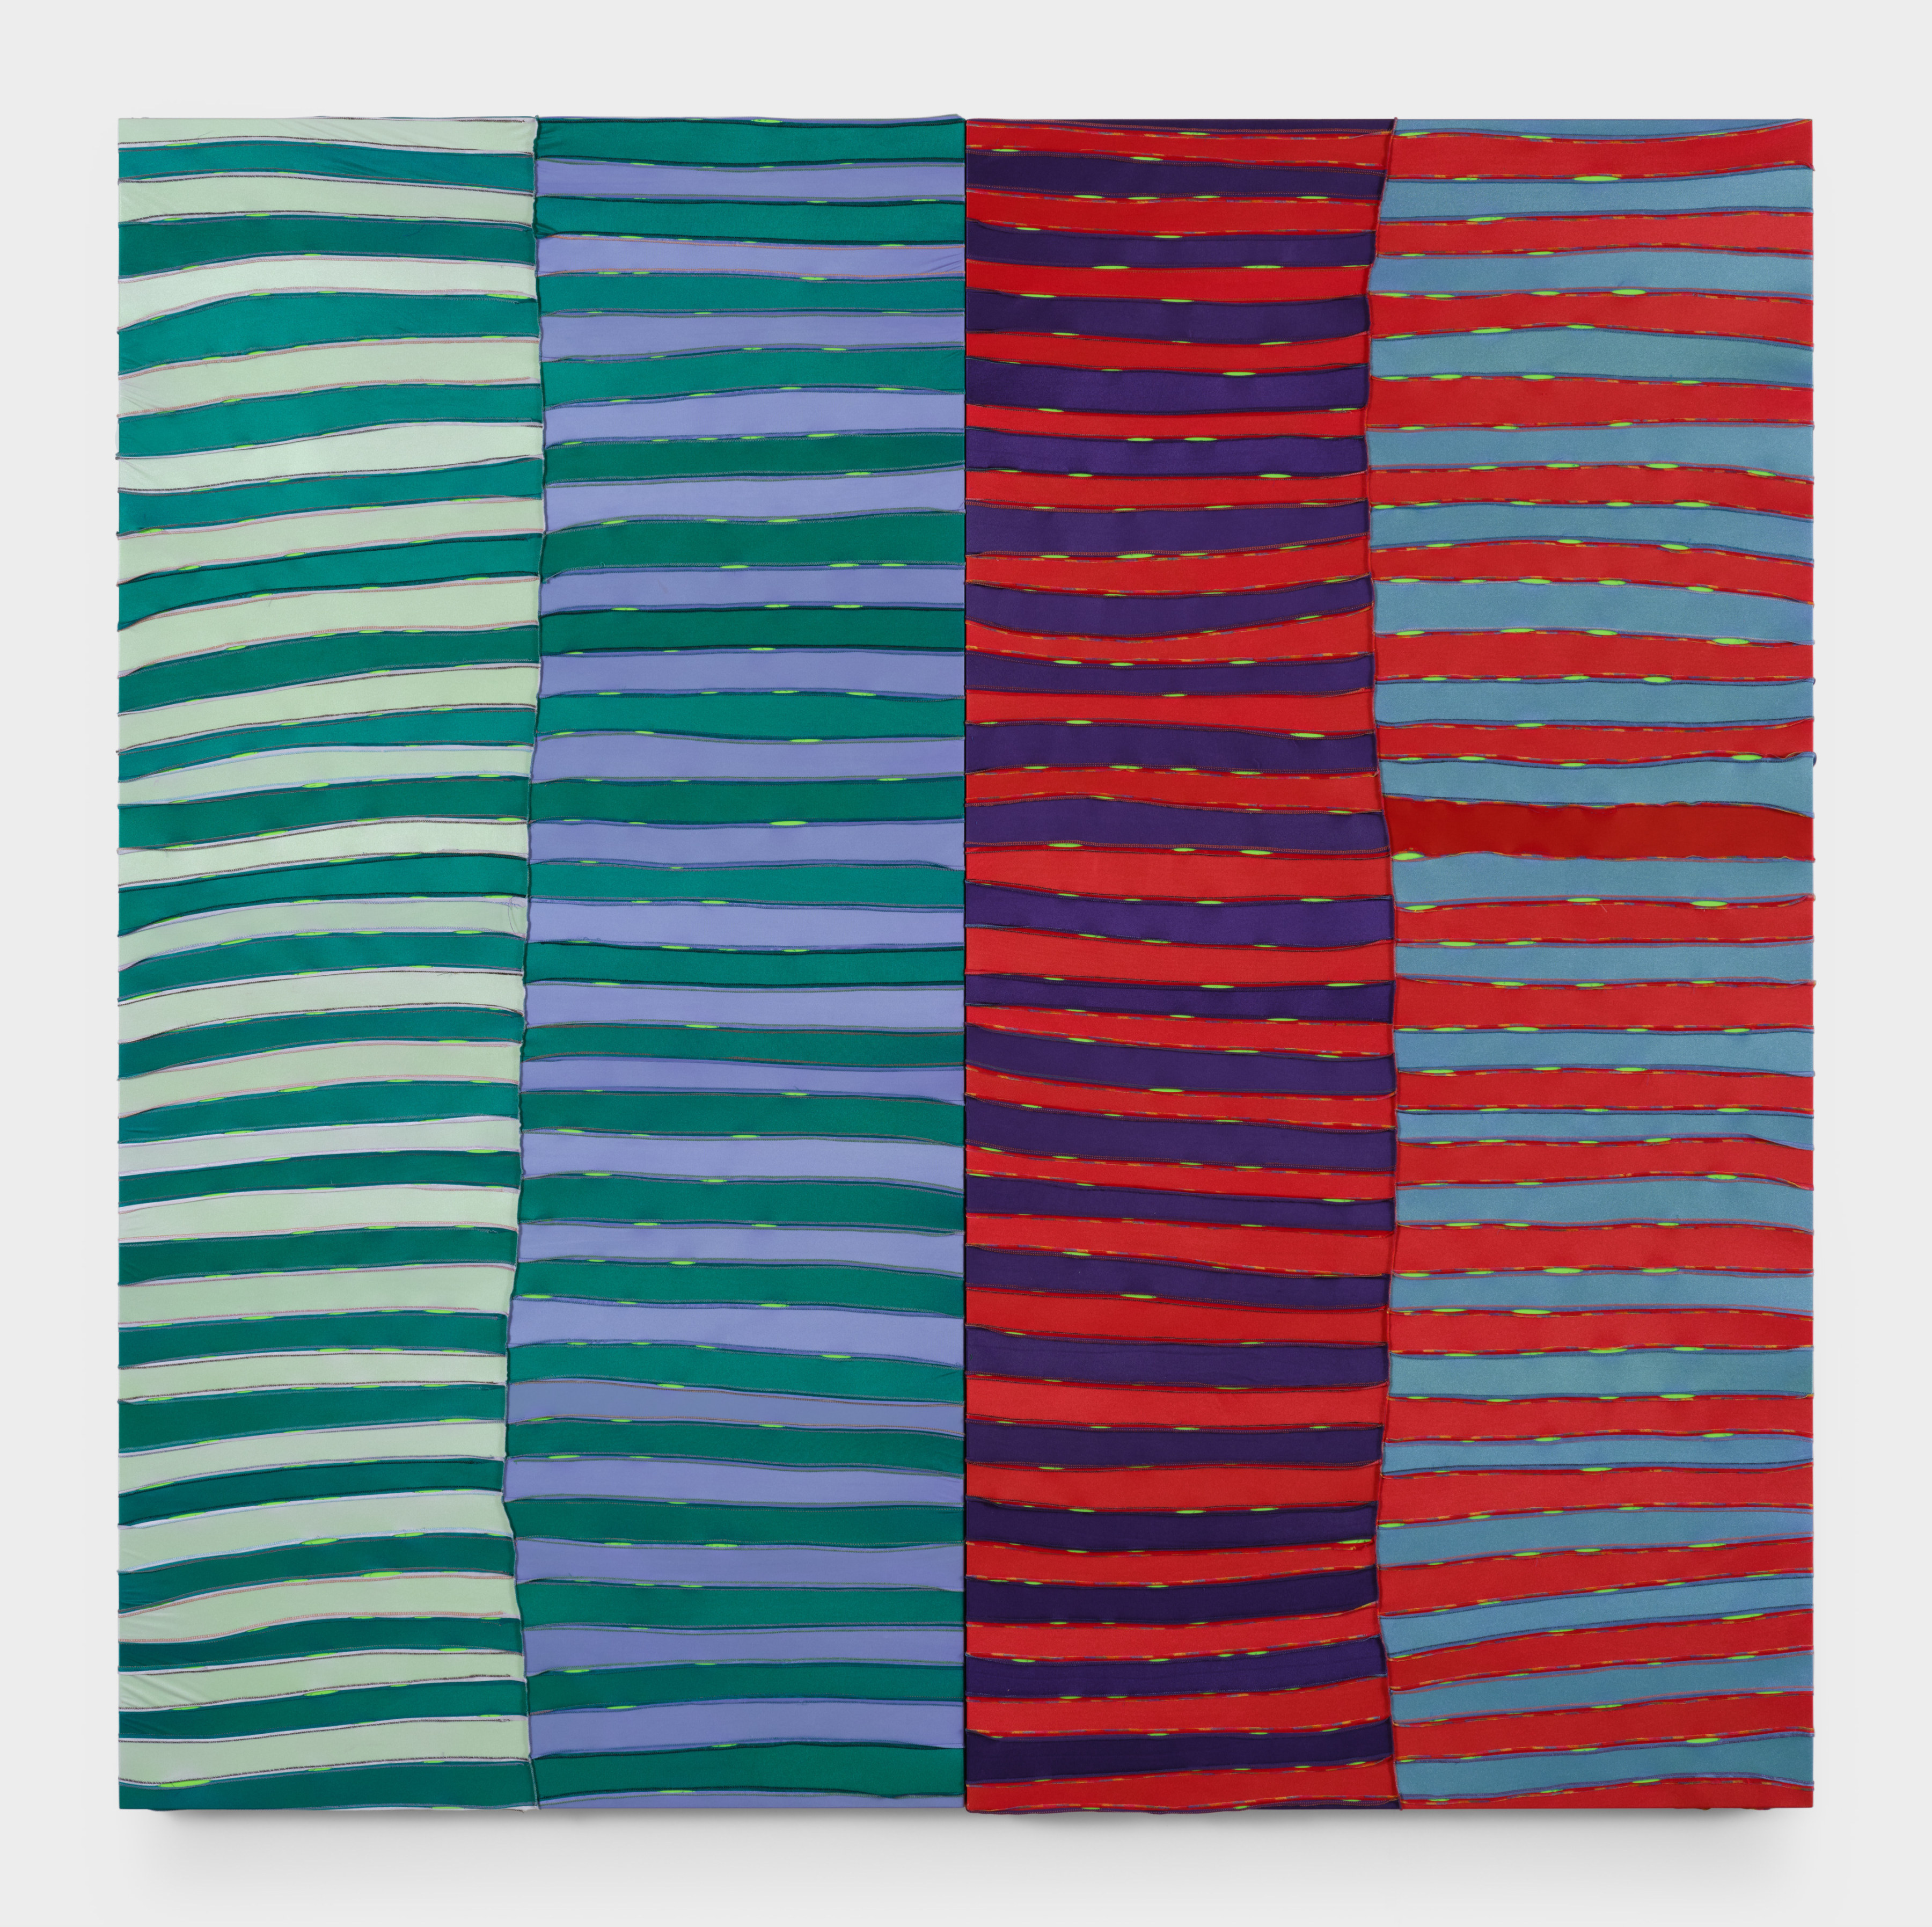 Image of Anthony Olubunmi Akinbola's work titled "Shame". Stretched and sewn rectangular sections of durags in greens, blues and reds. 96 x 96 in (243.8 x 243.8 cm), durags on aluminum and wood frame, 2023